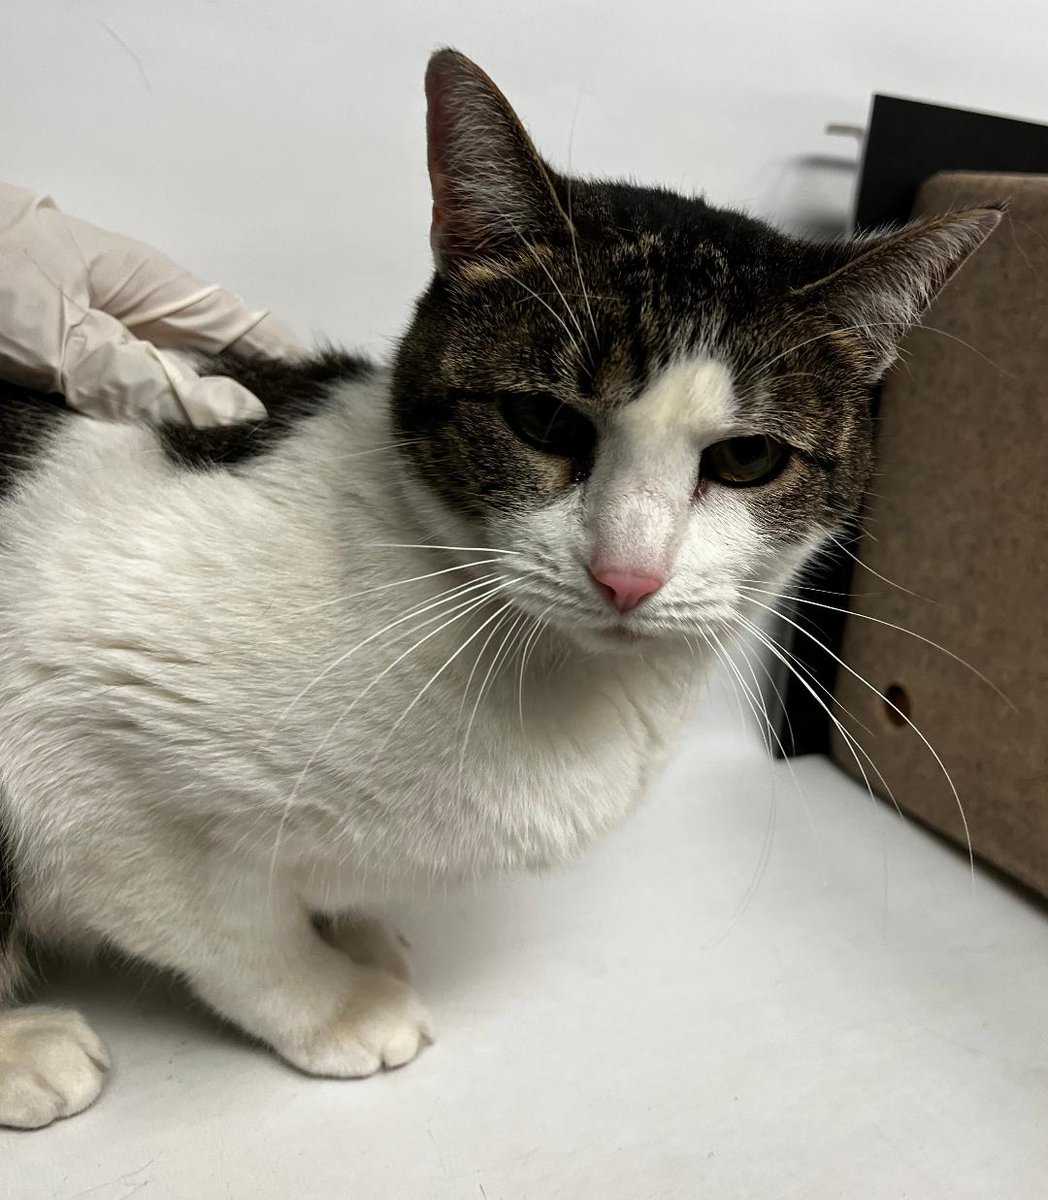 NYC's DEATH ROW CATS on X: *SHELTER PLEA* NEW PHOTO - **FeLV+** Poor Beluga  is a sweet cat who will need some TLC. (consider hospice vs EHR) NEEDS OUT  ASAP!   /